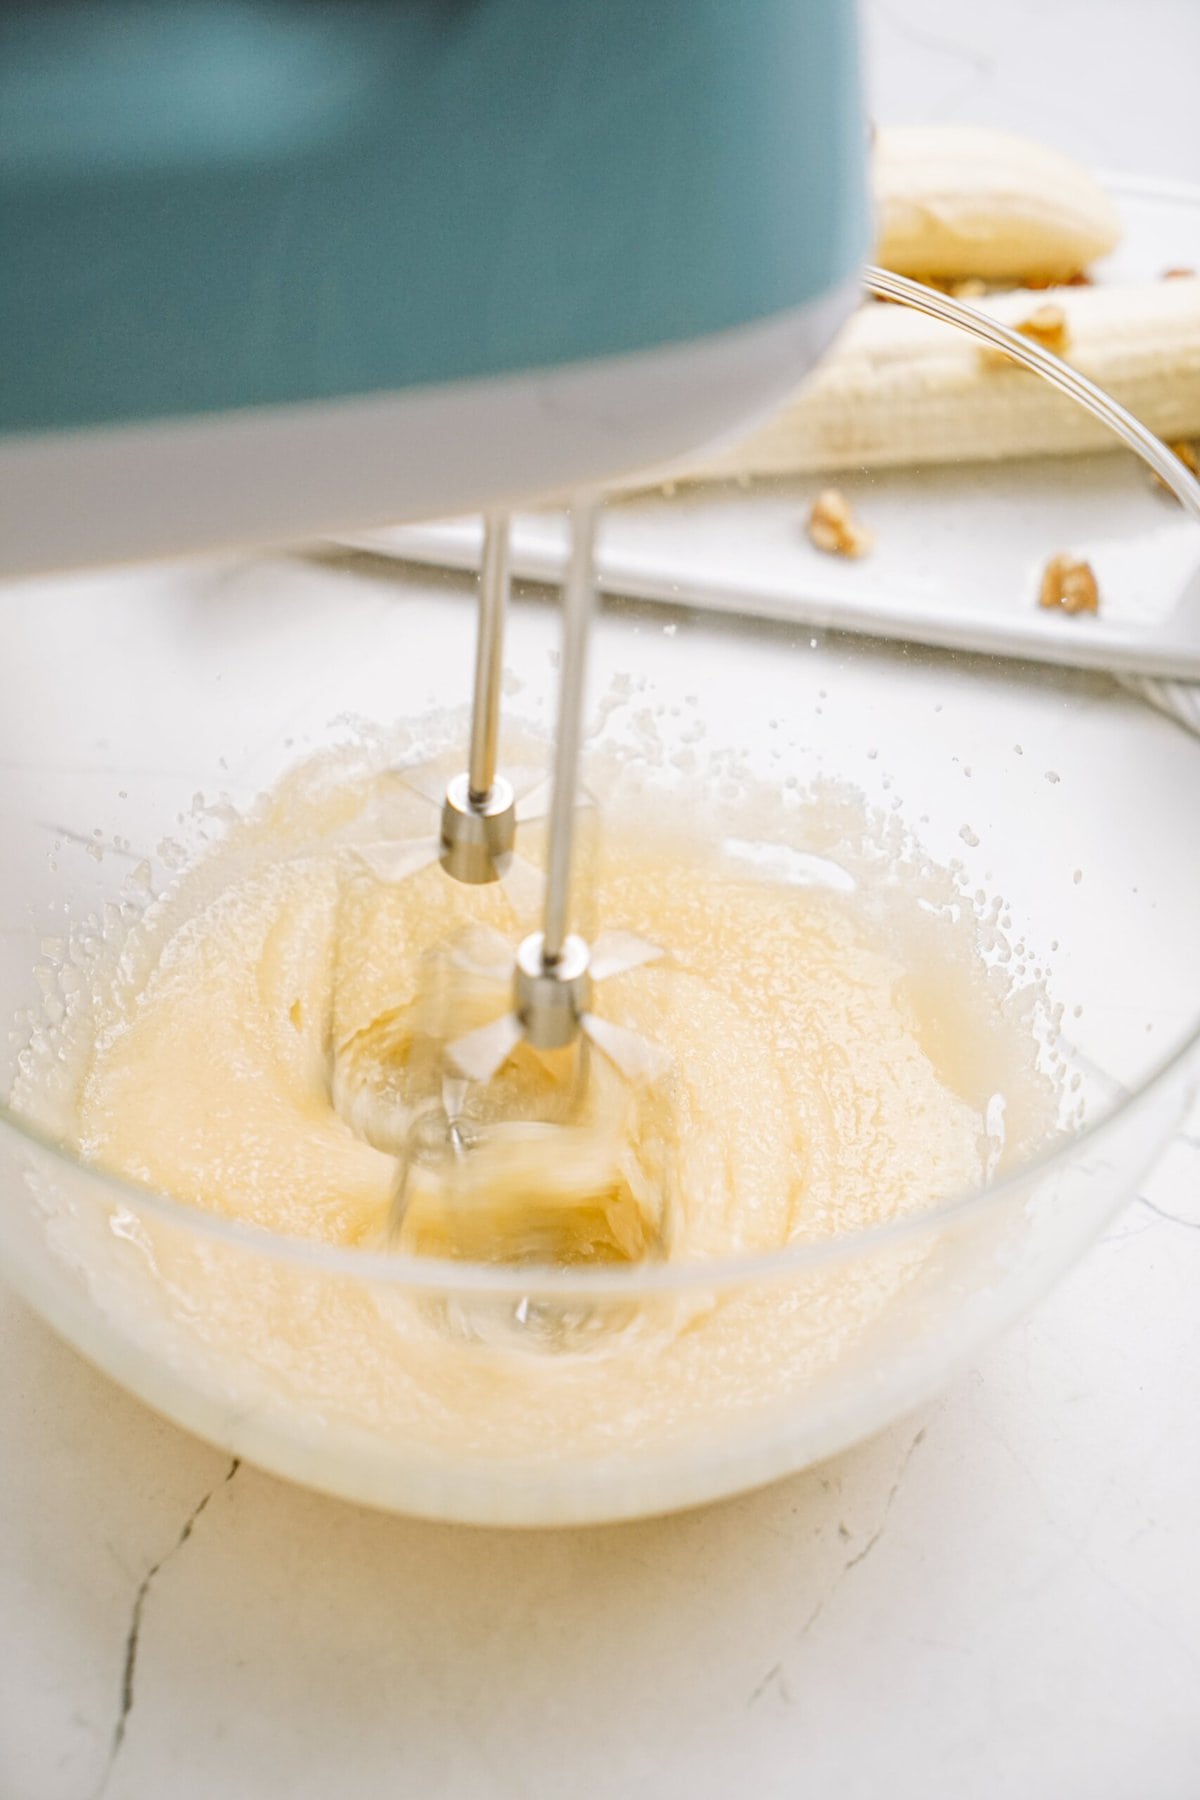 whisking cake batter in a glass bowl 